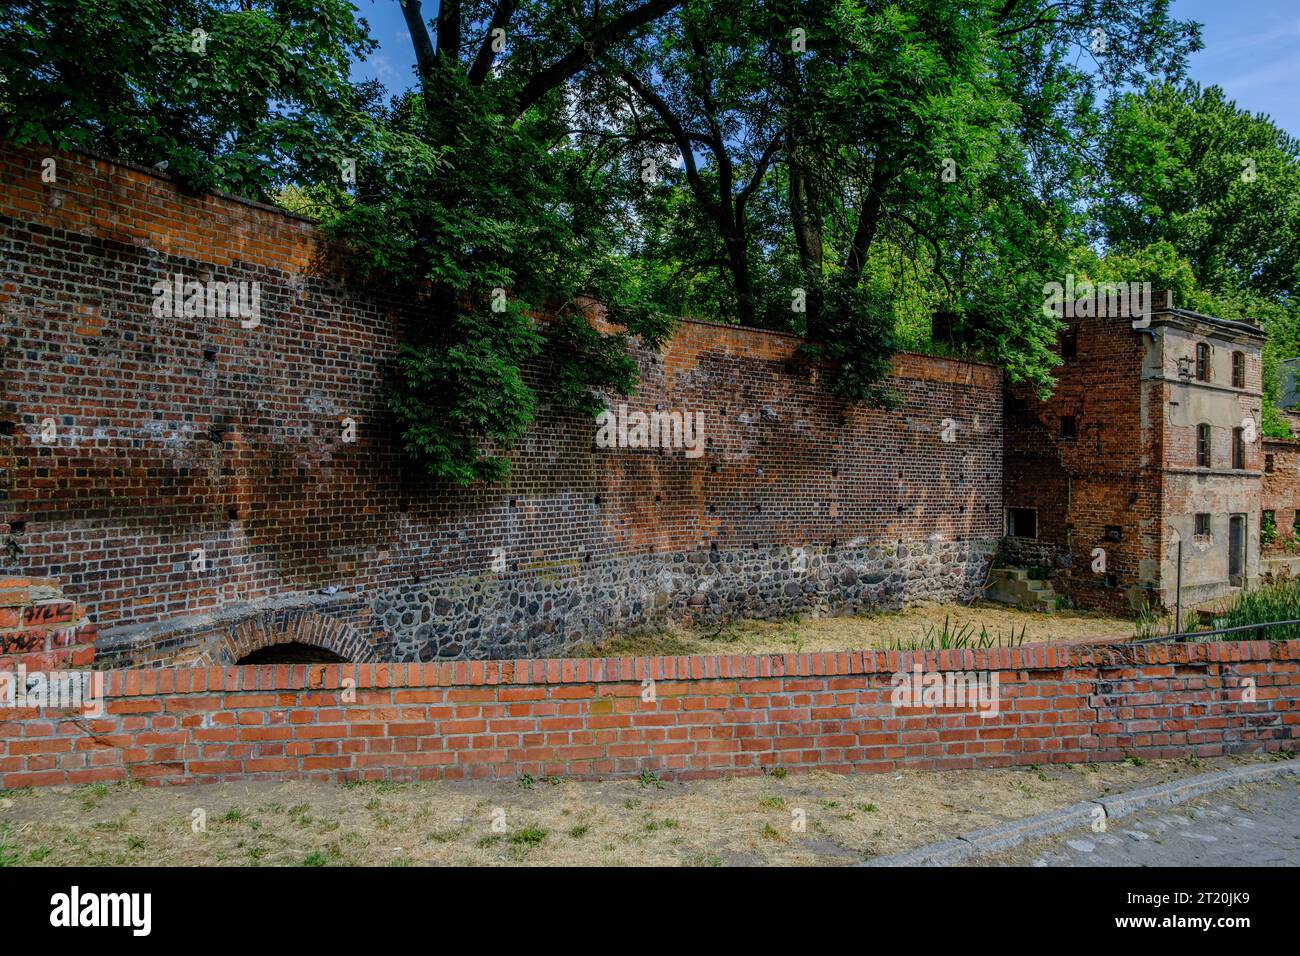 Abandoned, dilapidated building integrated into the old historic town wall of Namyslow (Namslau), Opole Voivodeship, Poland. Stock Photo